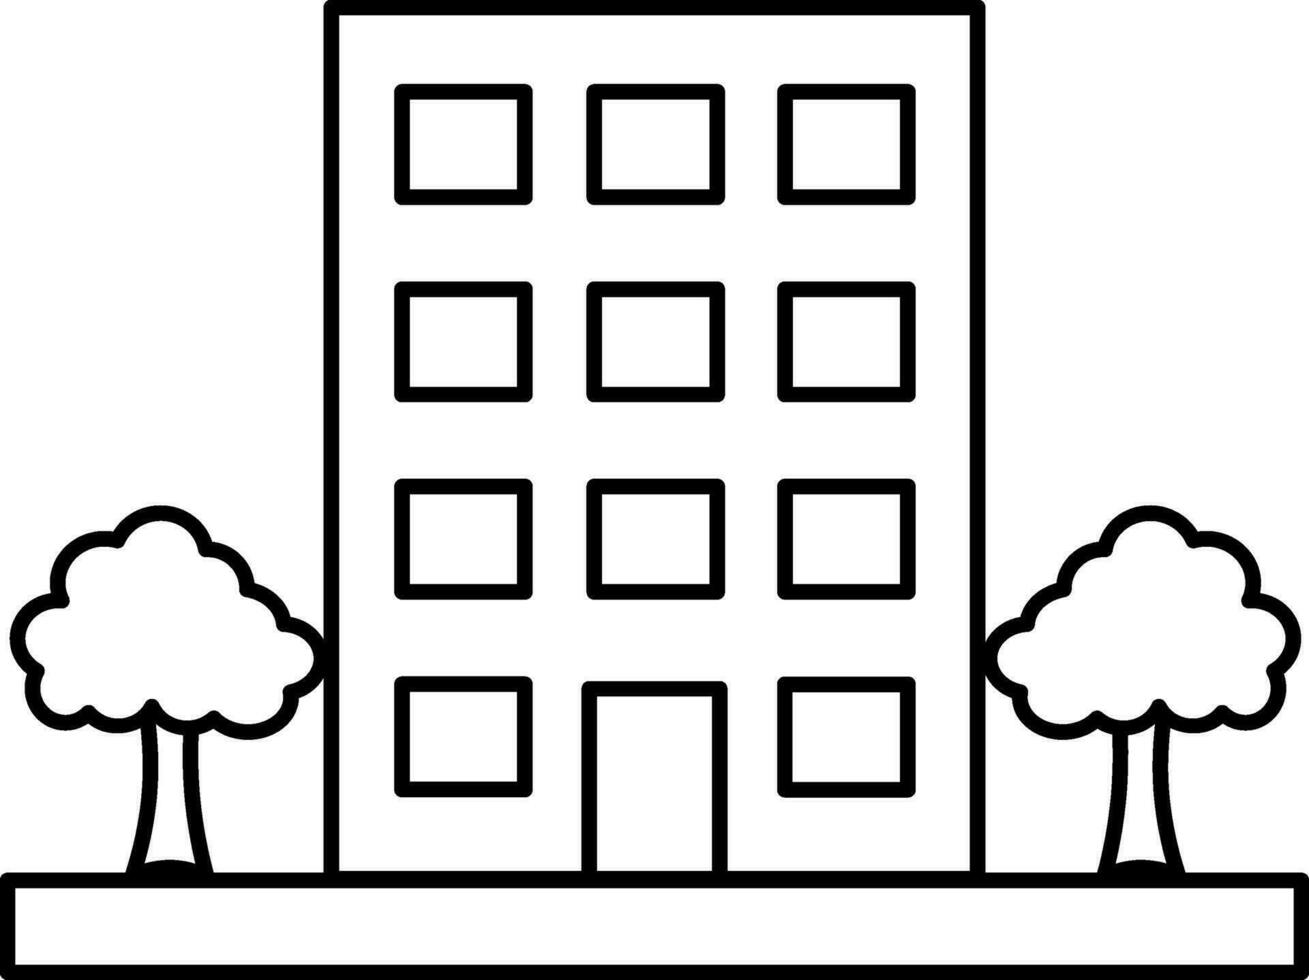 Architect Building with Trees icon in Black Line Art. vector